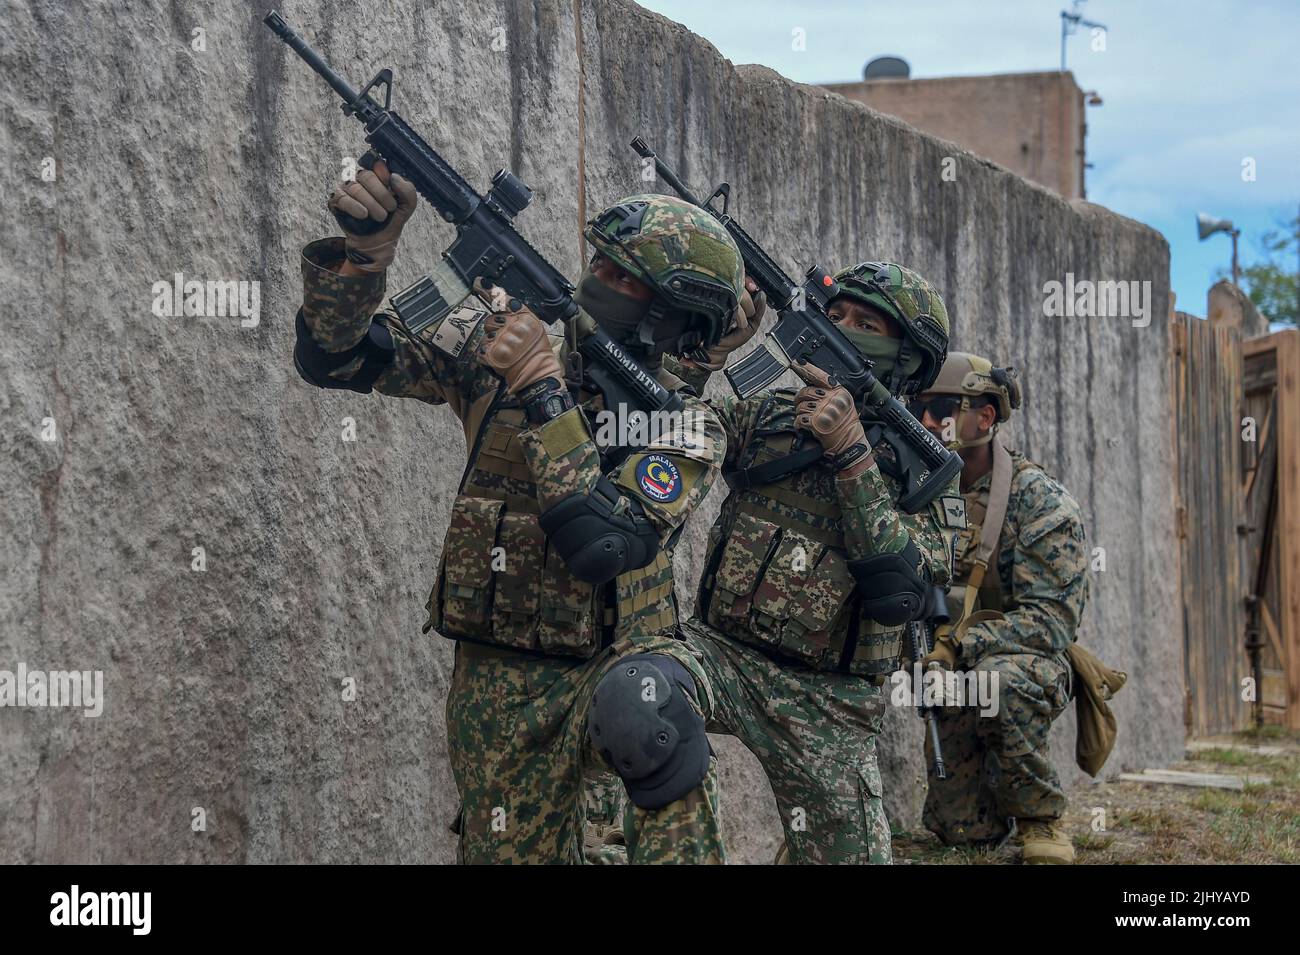 Waimanalo, United States. 18 July, 2022. Malaysian Army soldiers and a U.S. Marine provide cover during a simulated urban terrain warfare exercise during the Rim of the Pacific exercises, July 18, 2022 in Bellows Air Force Station, Hawaii. Credit: MCS Leon Vonguyen/U.S. Navy/Alamy Live News Stock Photo